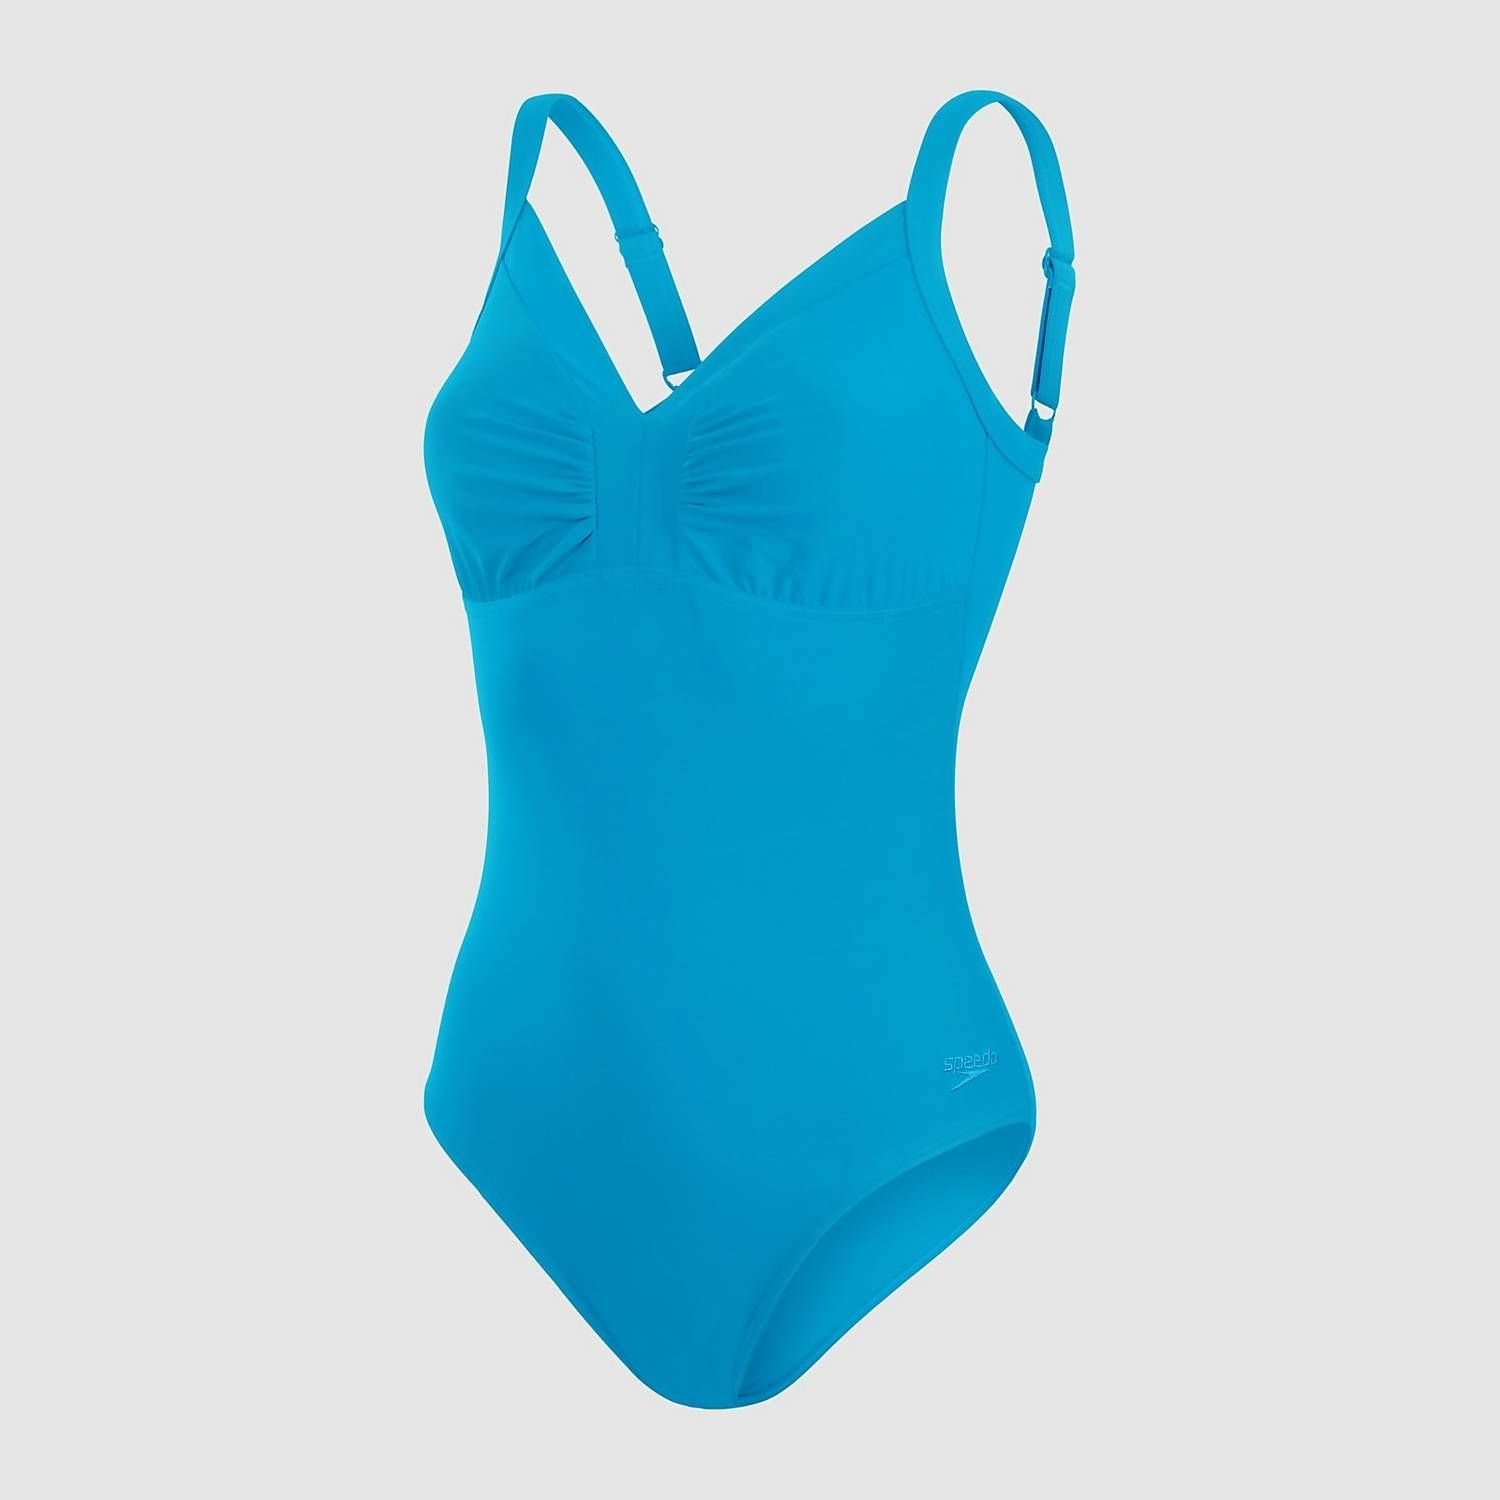 No Bust Support. Speedo Fit Laneback swimsuit Endurance blue size 10 and 12 